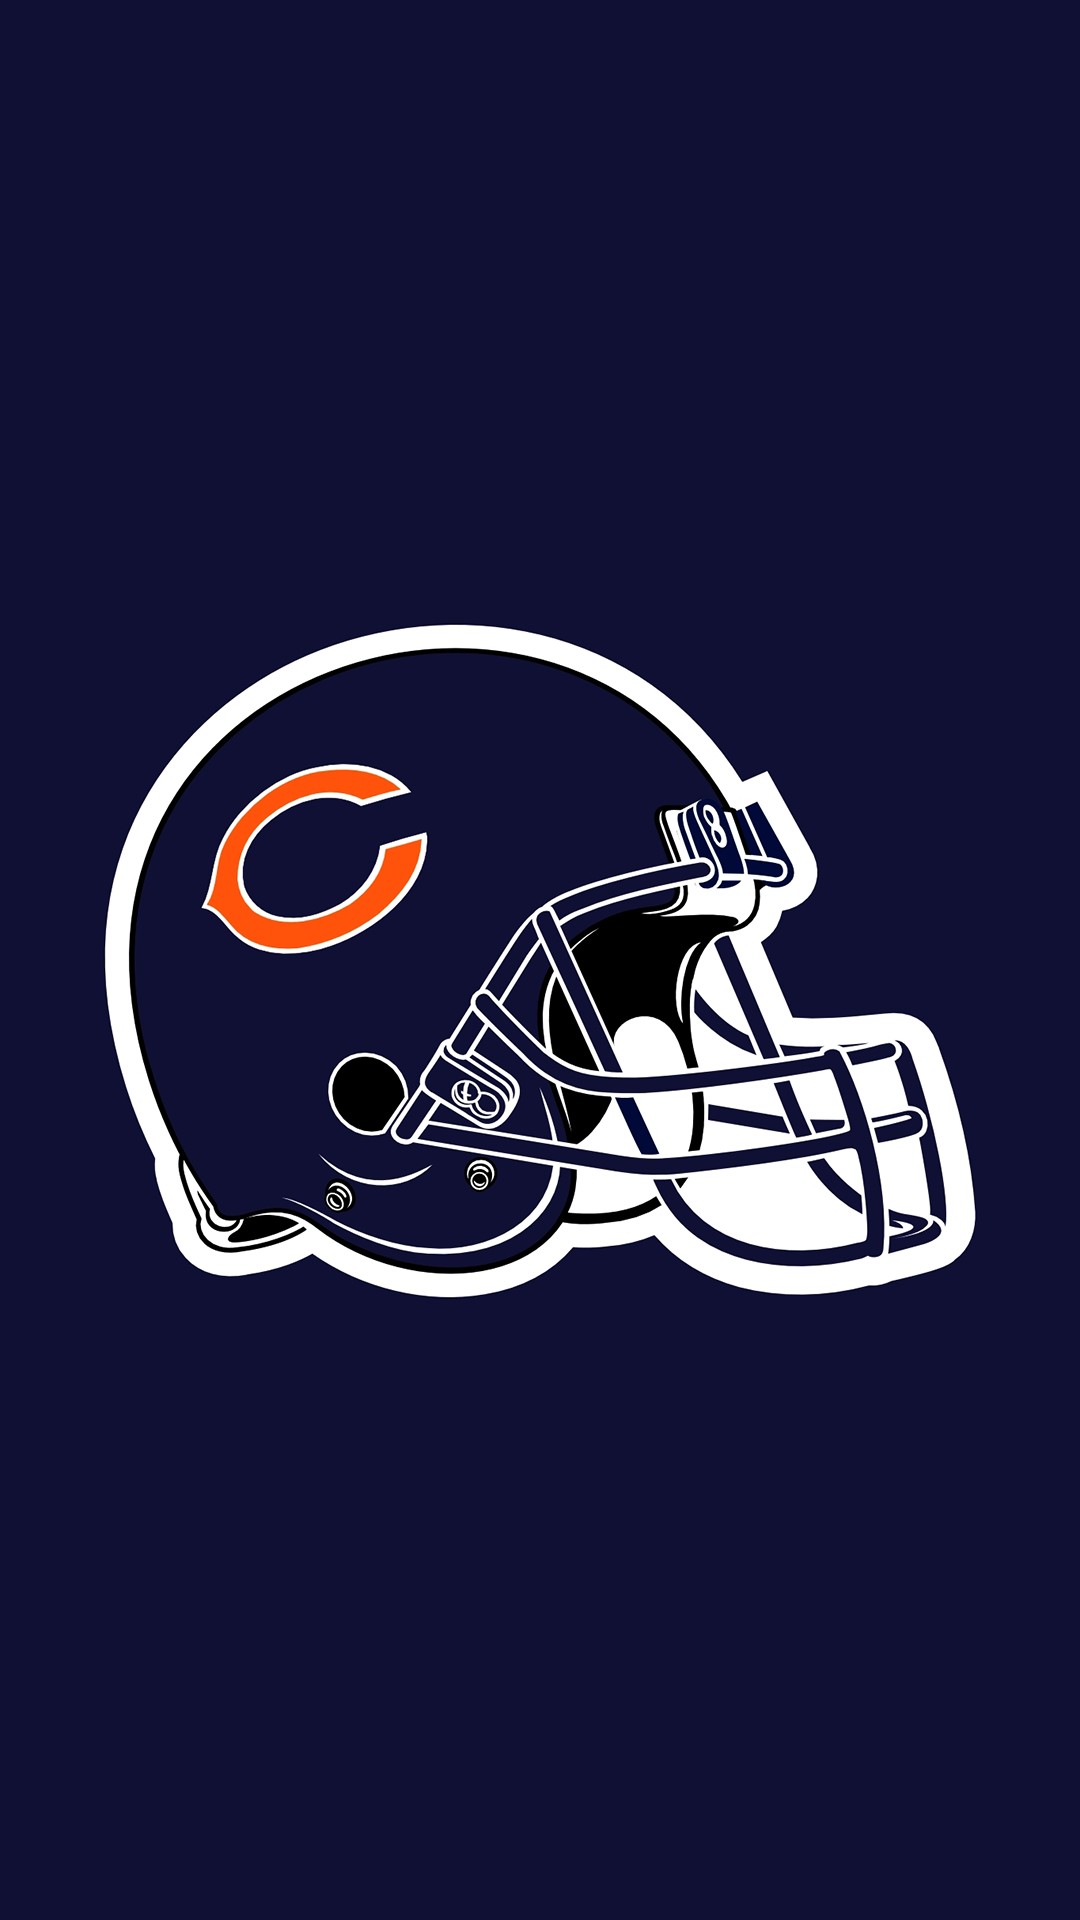 Chicago Bears iPhone Wallpaper High Quality with high-resolution 1080x1920 pixel. Donwload and set as wallpaper for your iPhone X, iPhone XS home screen backgrounds, XS Max, XR, iPhone8 lock screen wallpaper, iPhone 7, 6, SE and other mobile devices